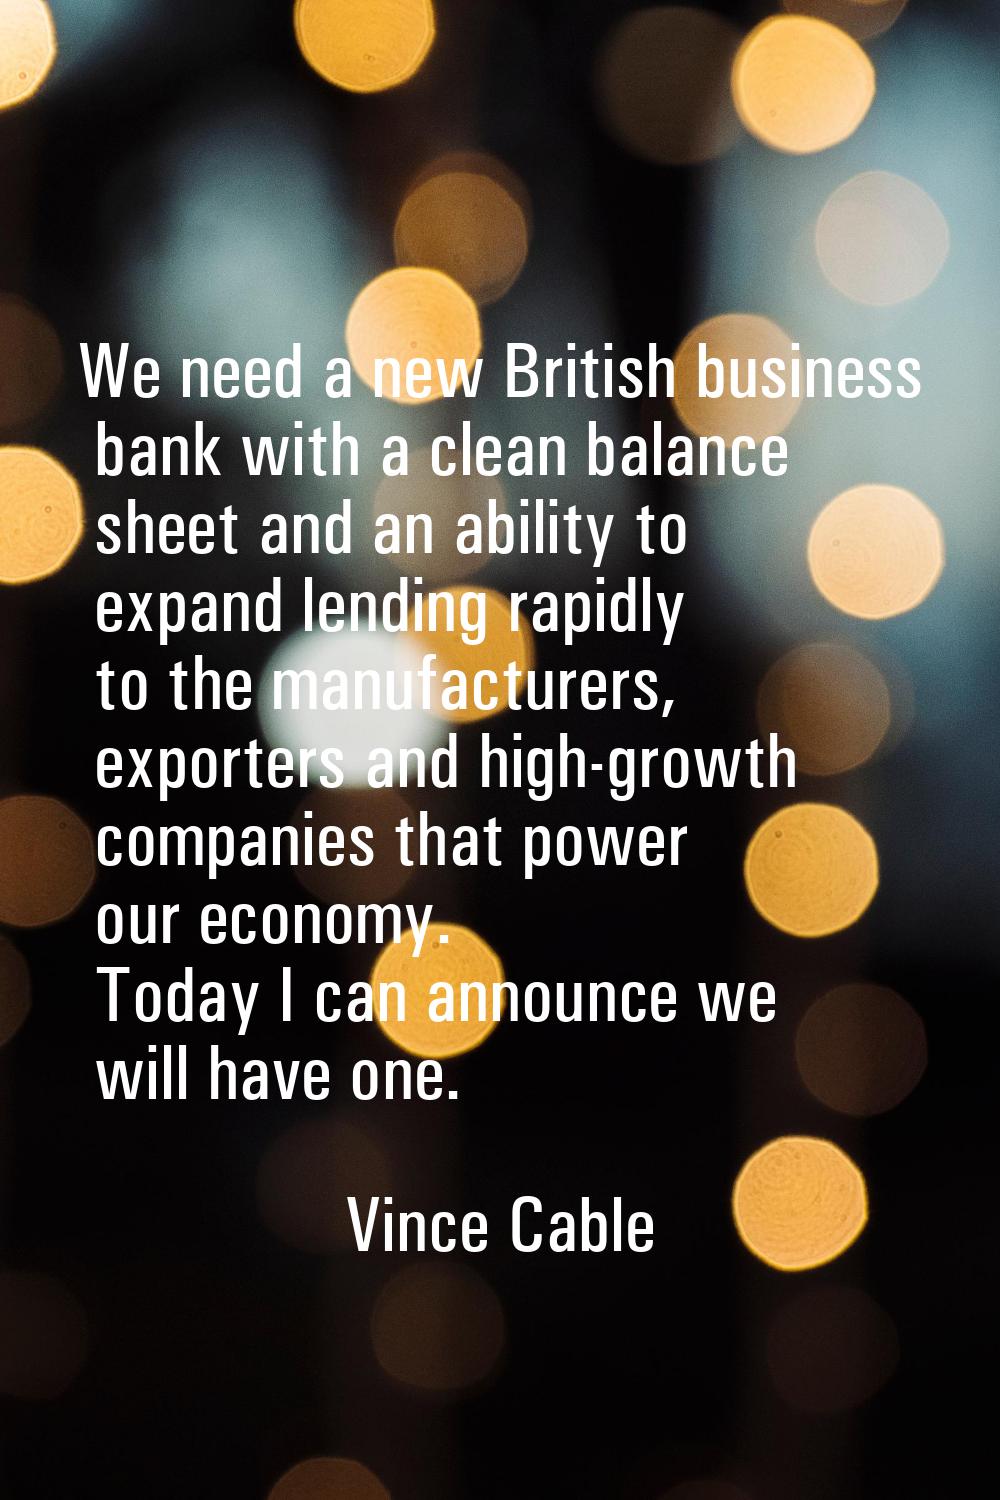 We need a new British business bank with a clean balance sheet and an ability to expand lending rap